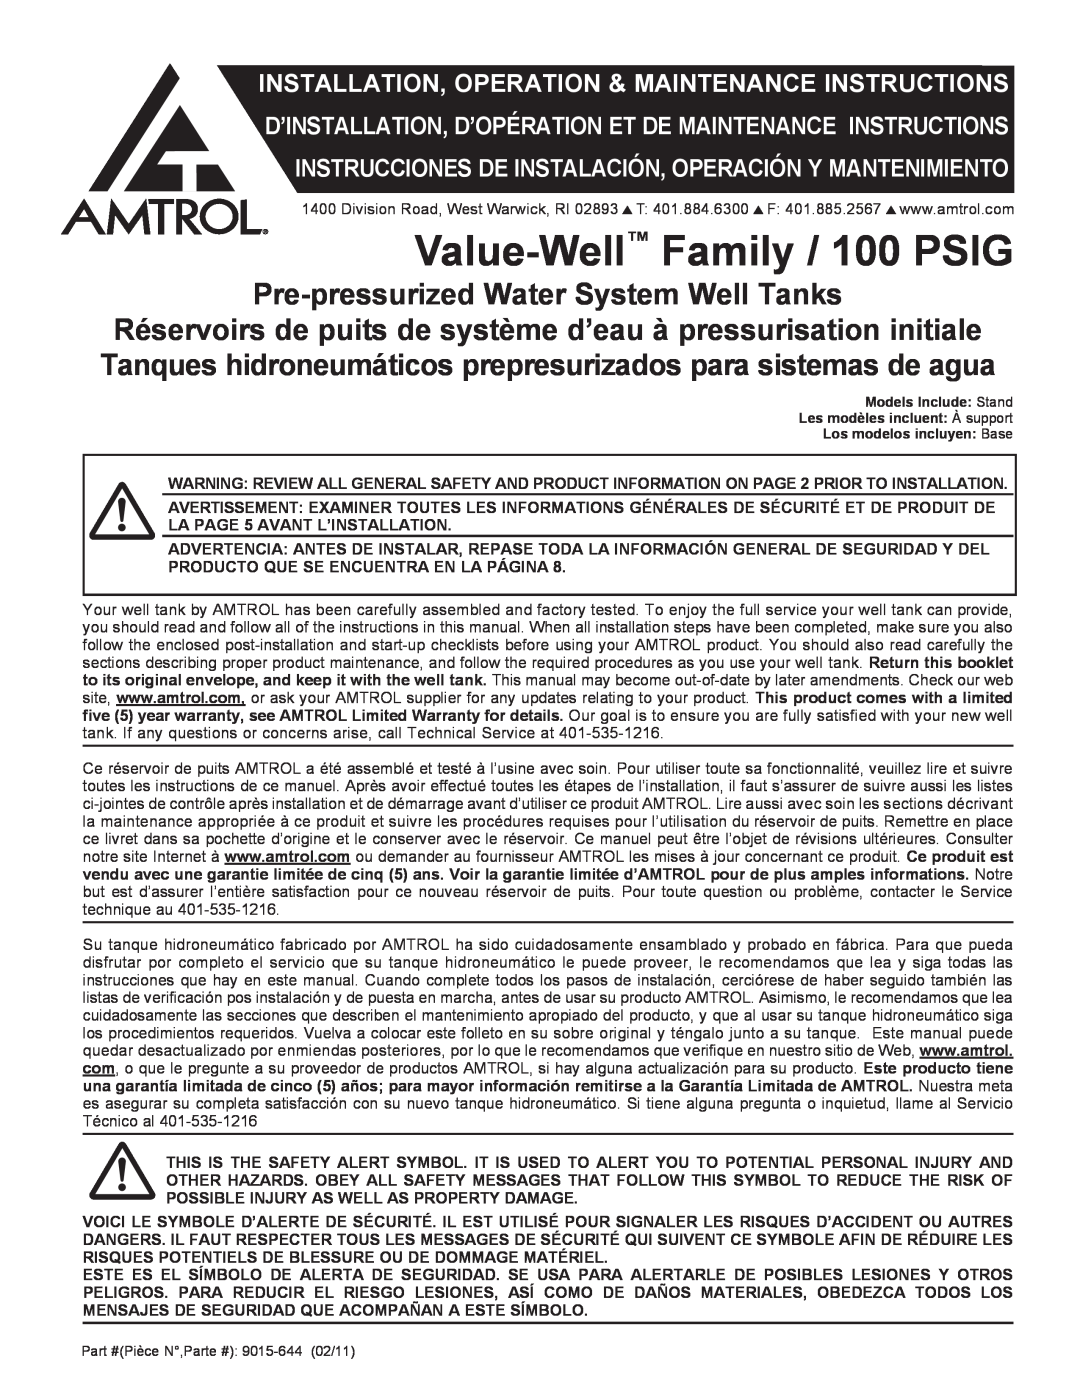 Amtrol warranty Value-Well Family / 100 PSIG, Pre-pressurized Water System Well Tanks 